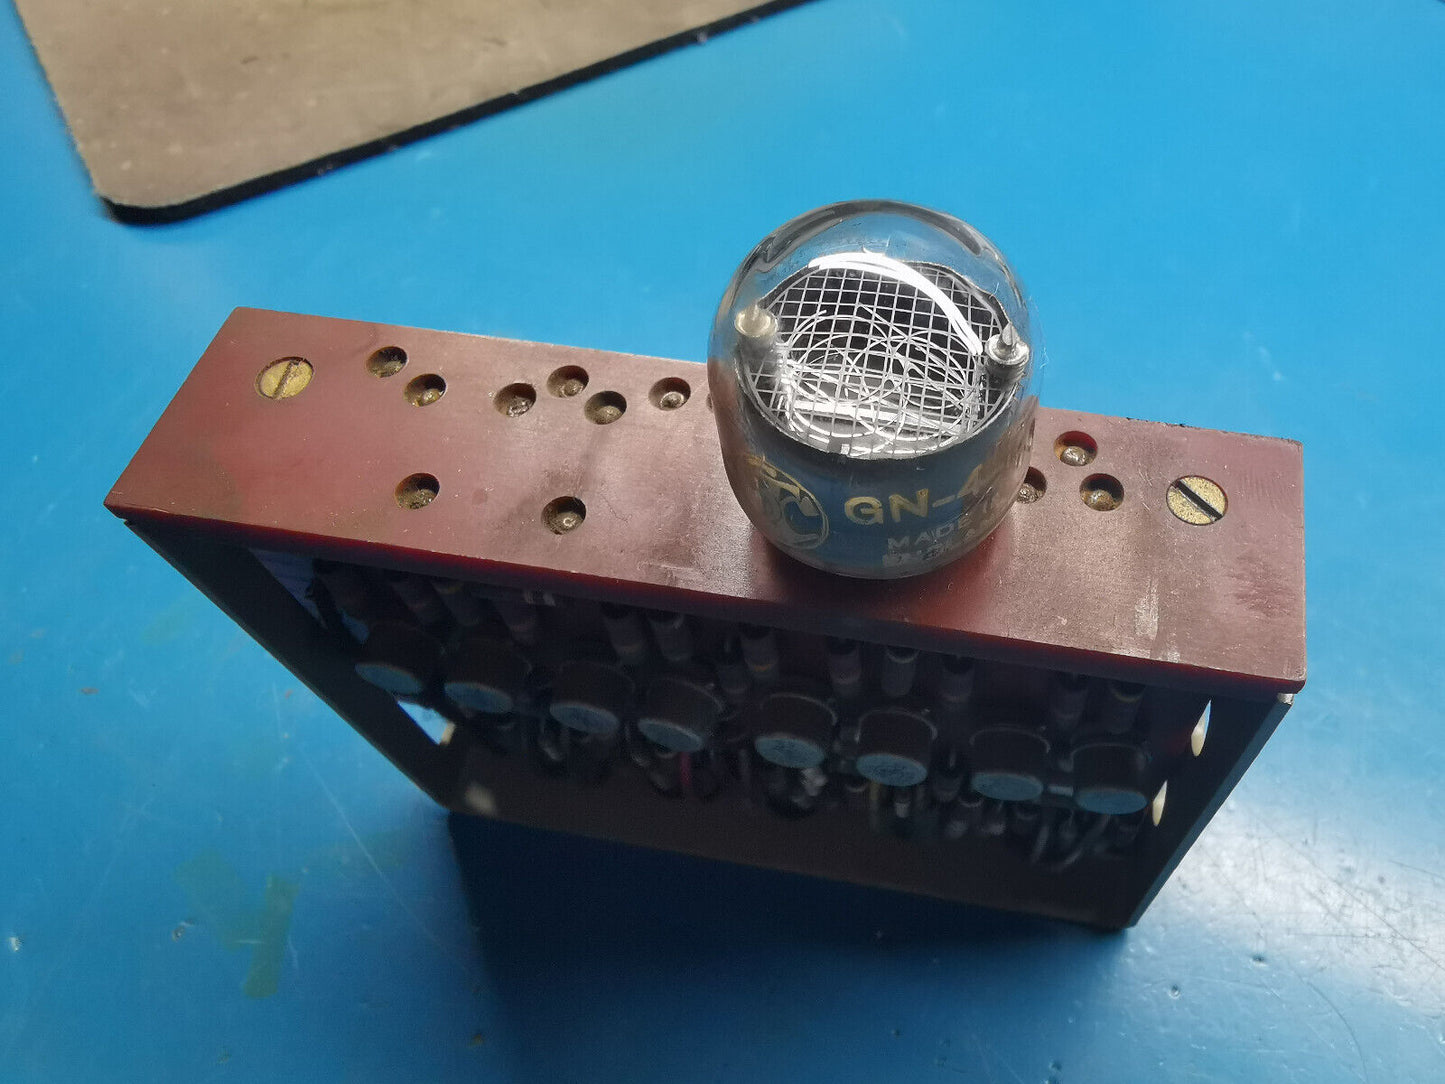 Vintage Nixi Tube Module From Marconi Frequency Counter